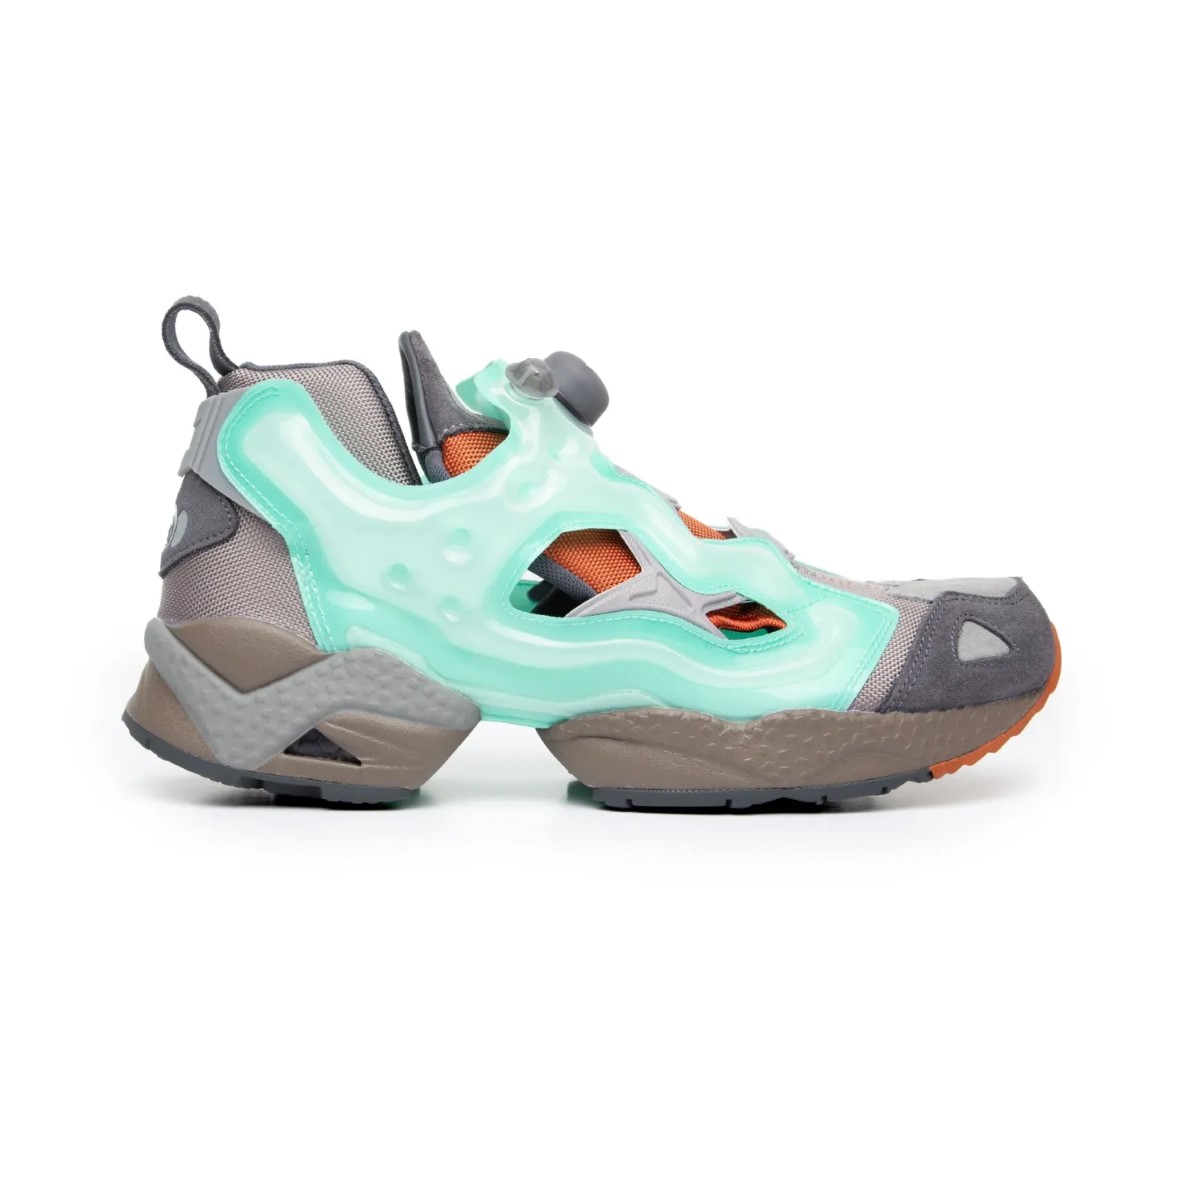 Reebok x Happy99 launch the Instapump Fury 95 sneakers, combining futuristic design with customizable features